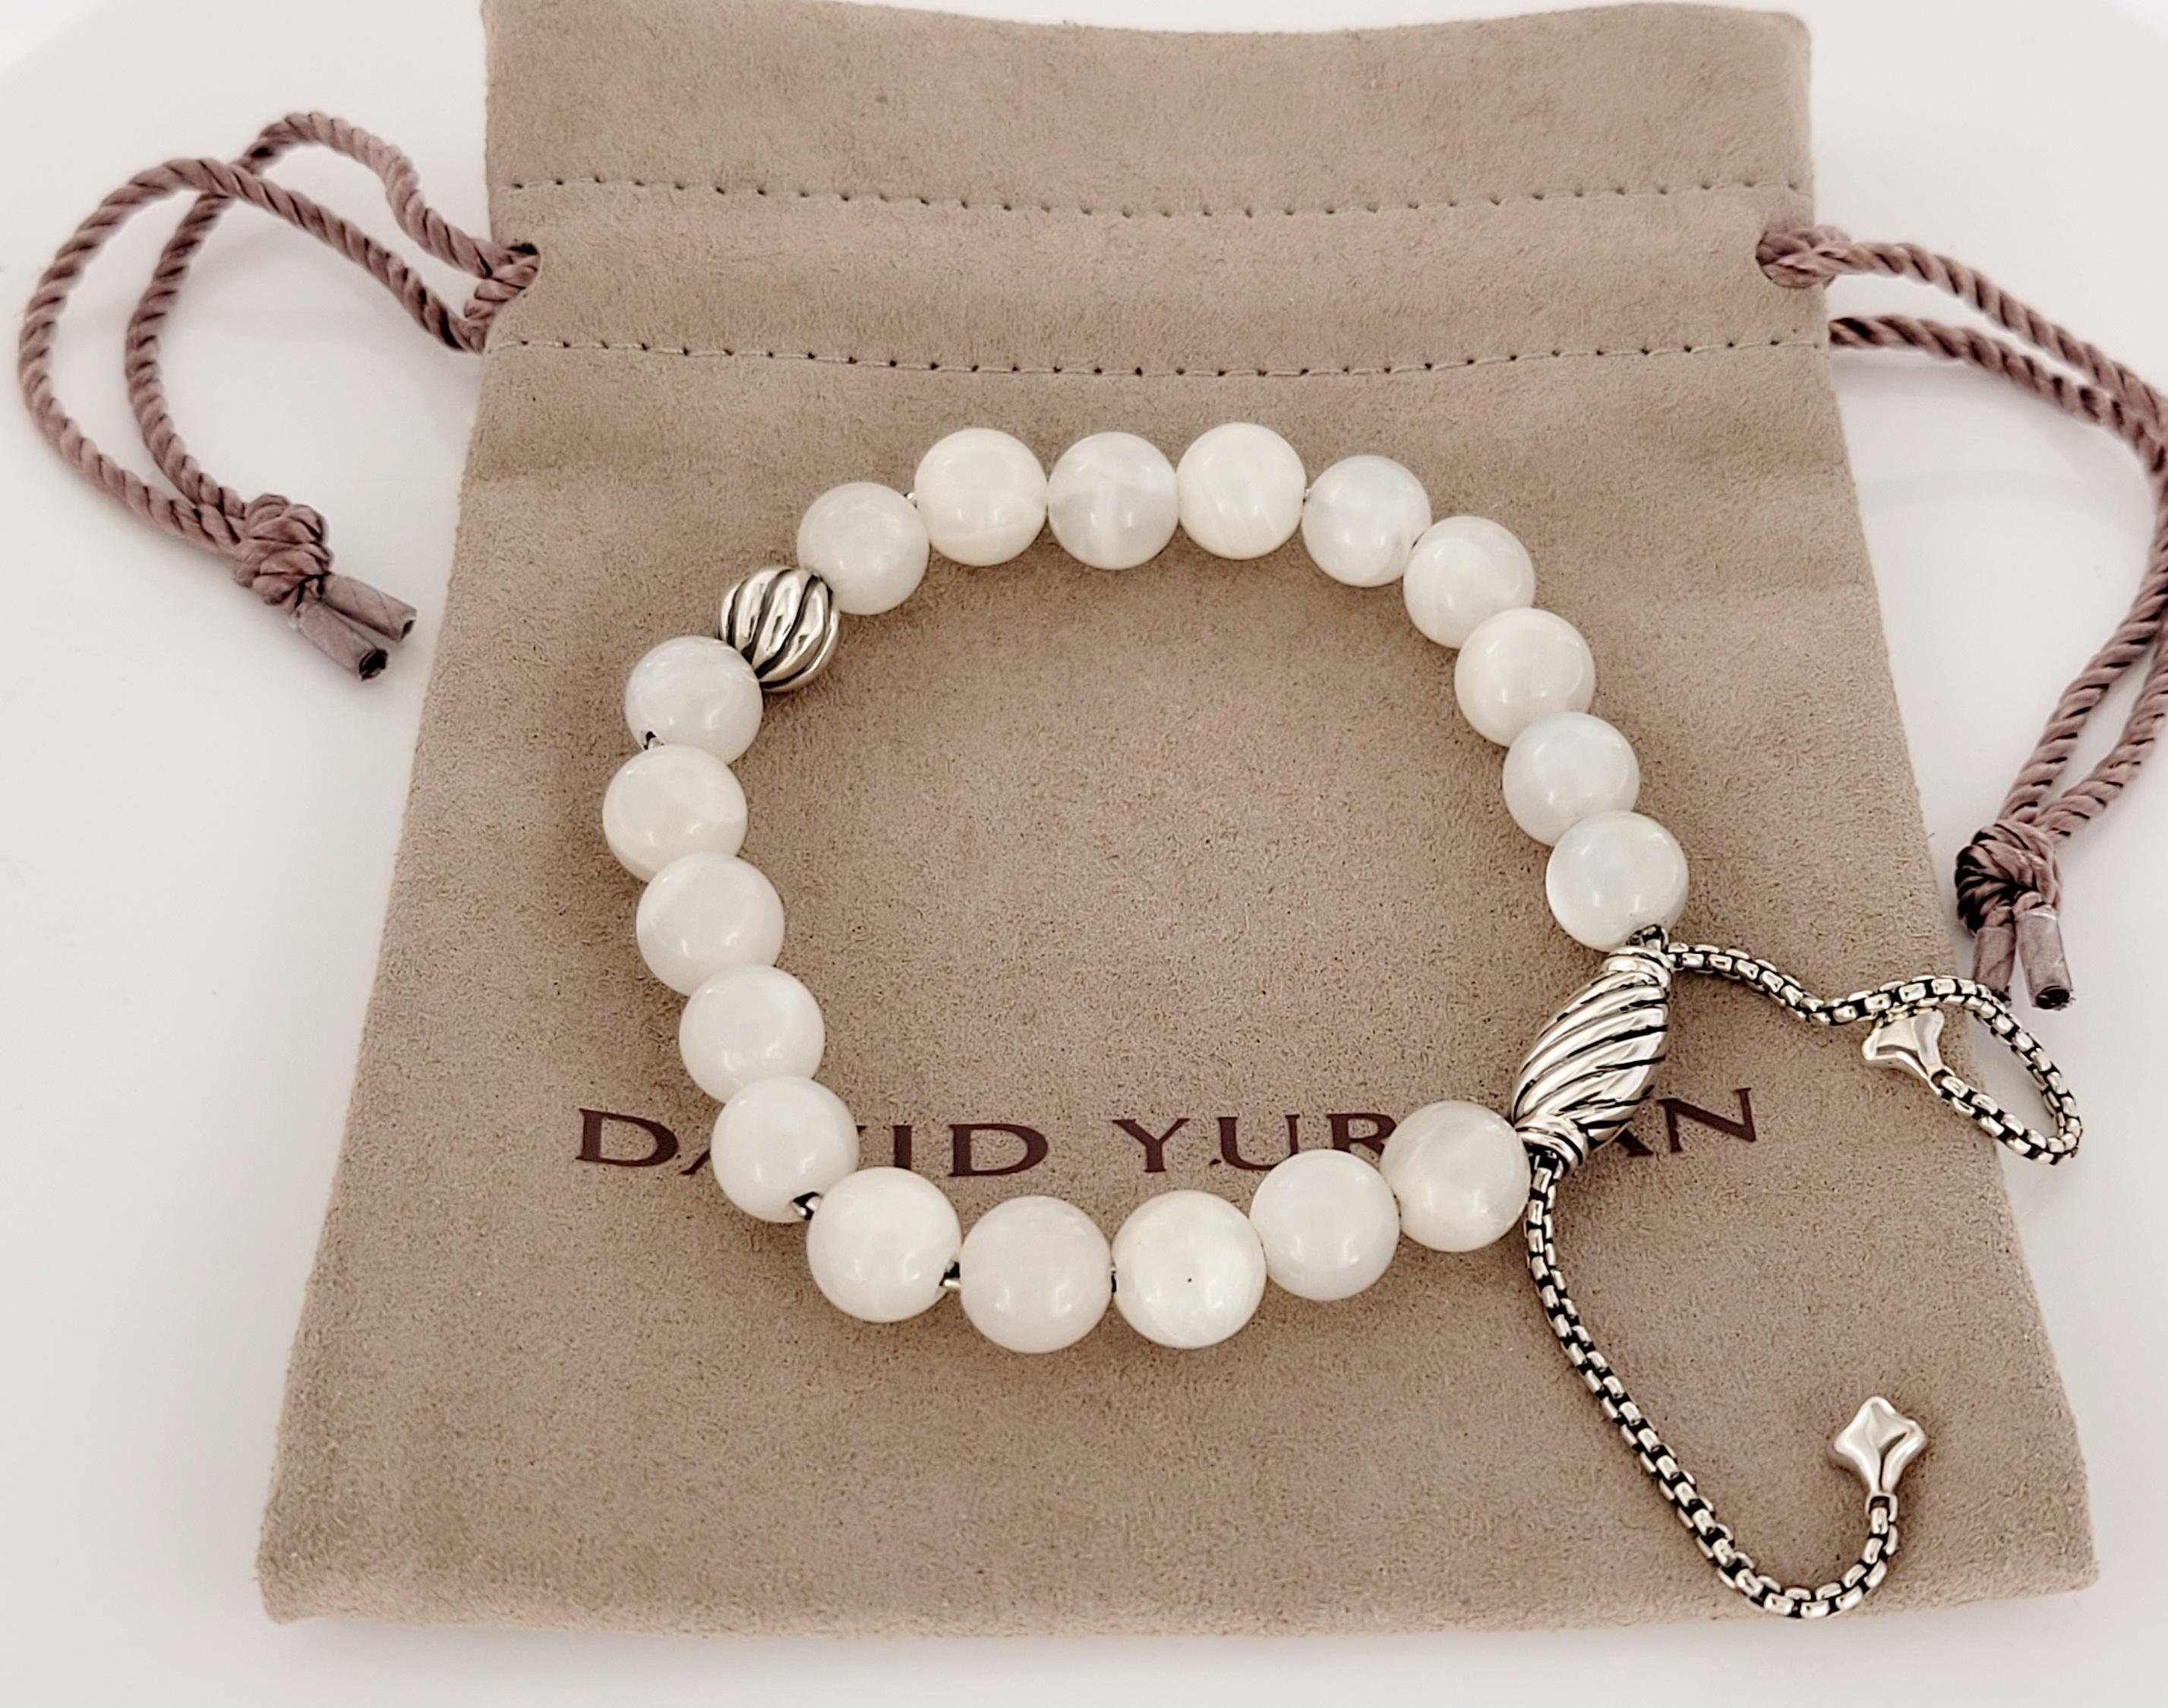 David Yurman
White bead bracelet 
Onyx width 8mm
Adjustable length 
Material Sterling Silver925
Comes with David Yurman pouch
Retail Price:$450
Condition New, without tags